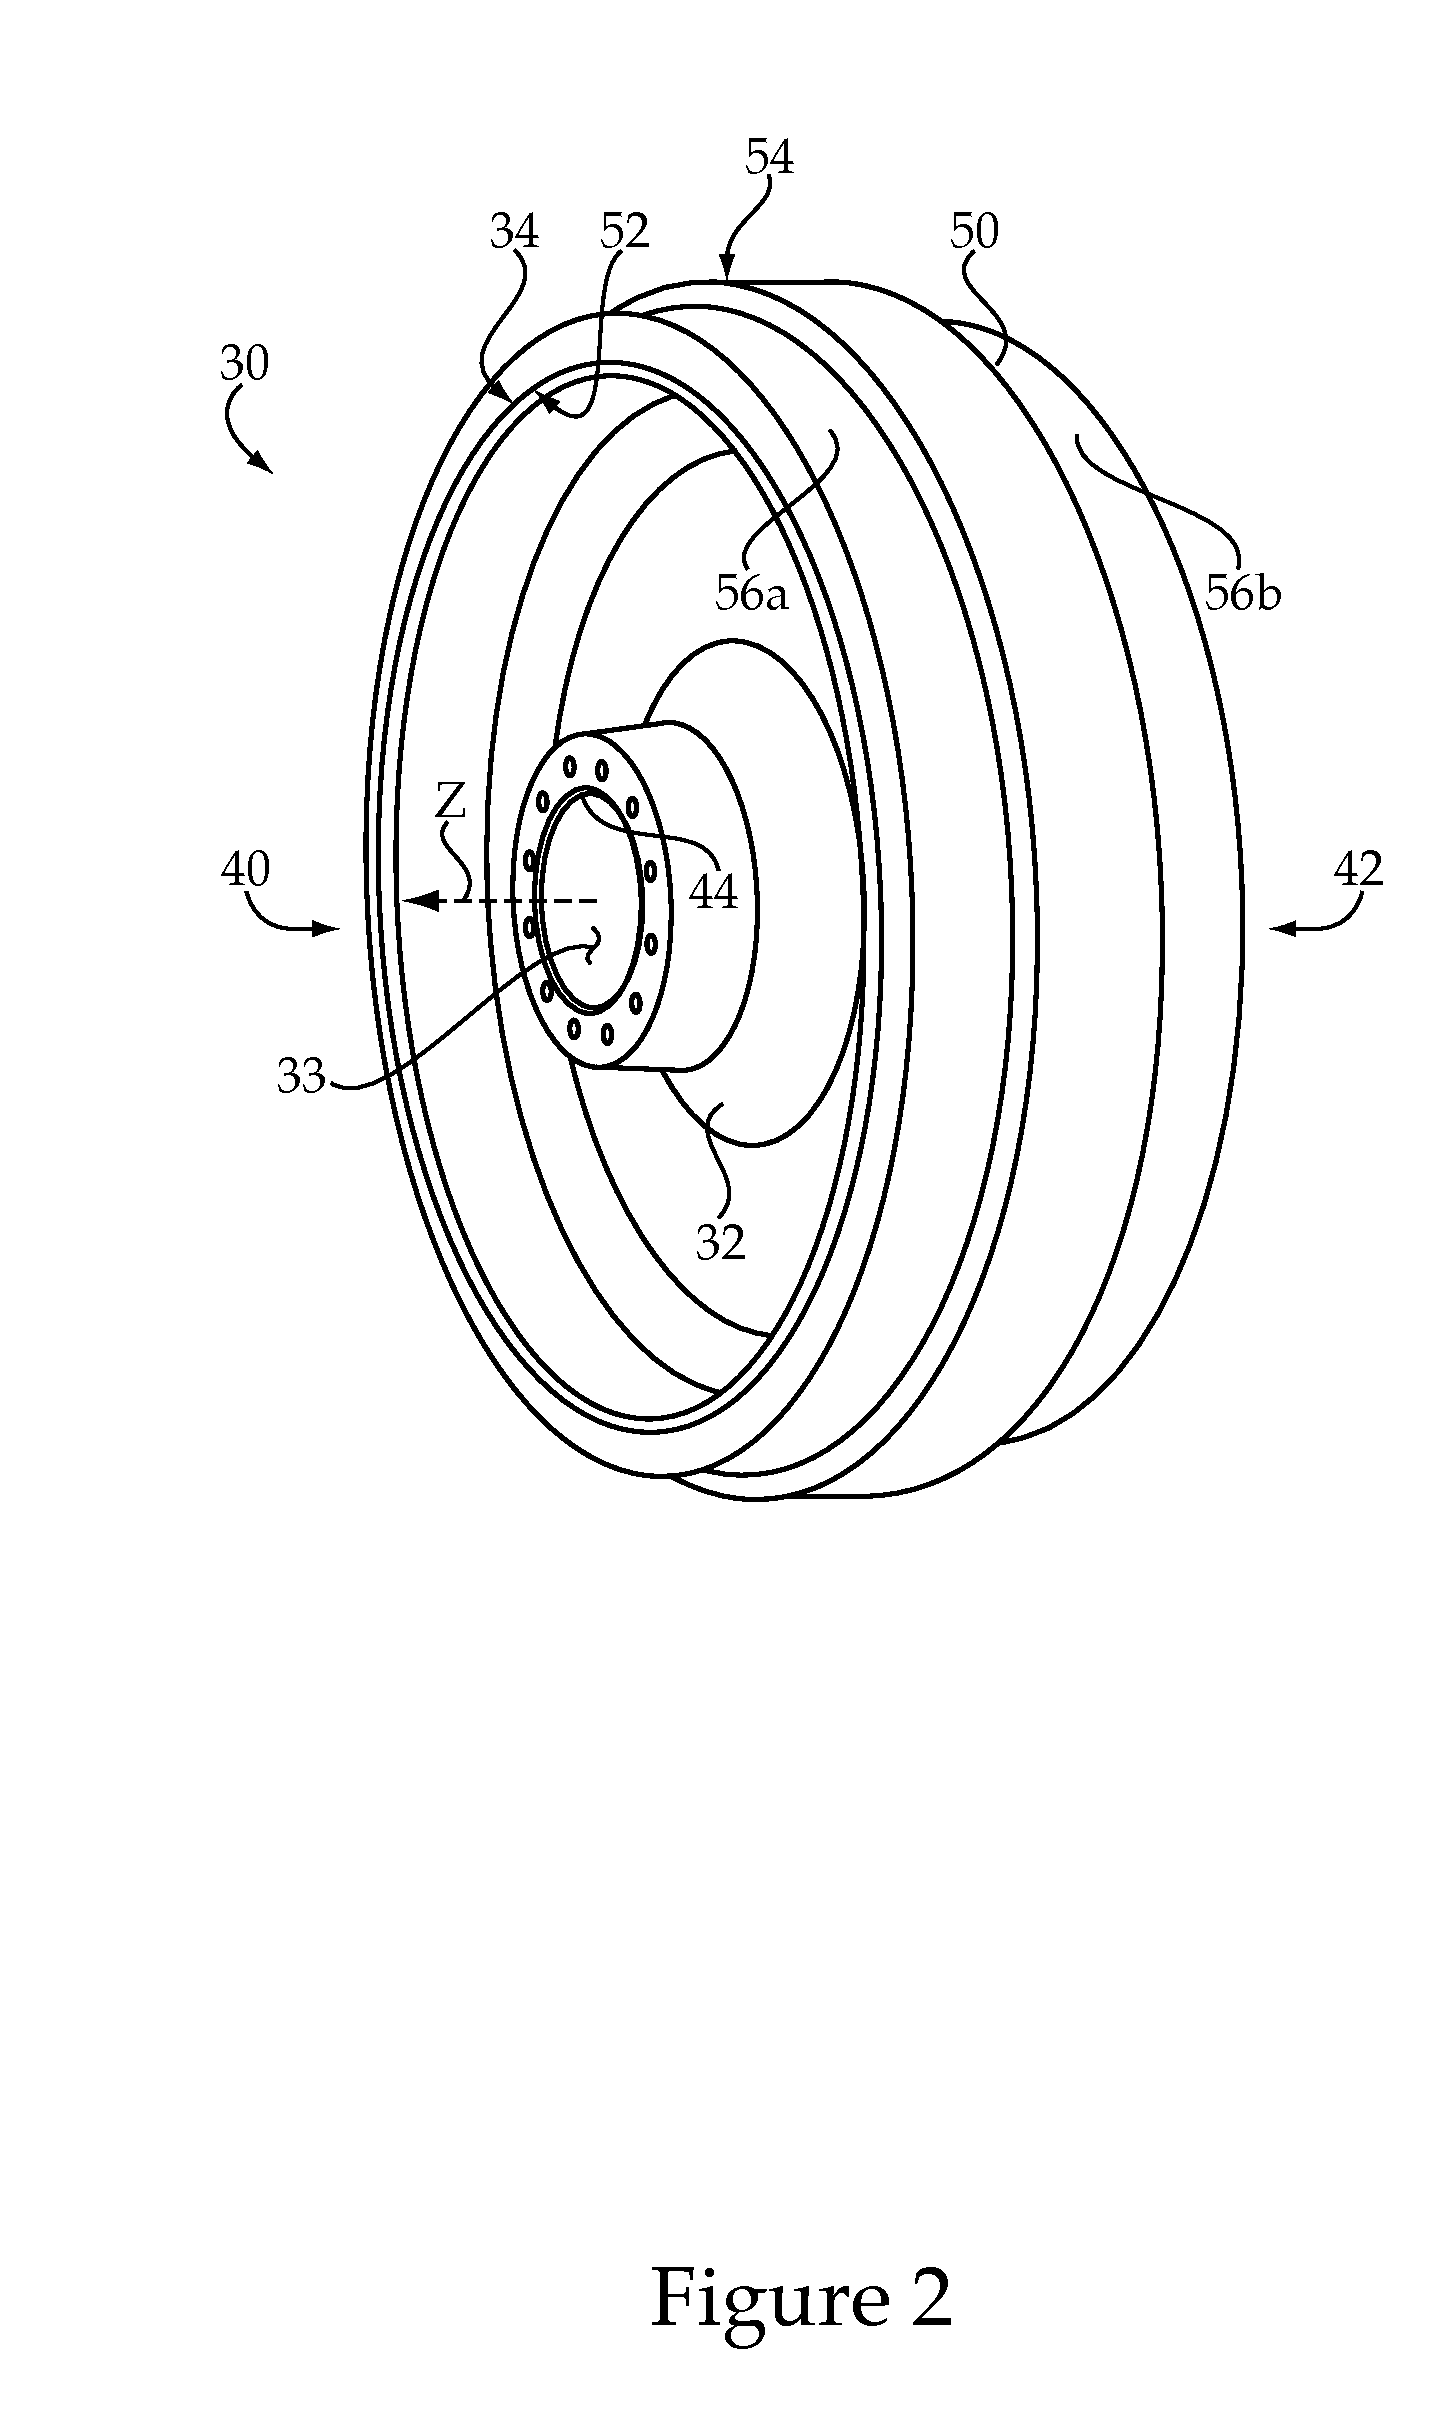 Compound Rim Assembly For Idler In An Undercarriage System Of A Track-Type Machine